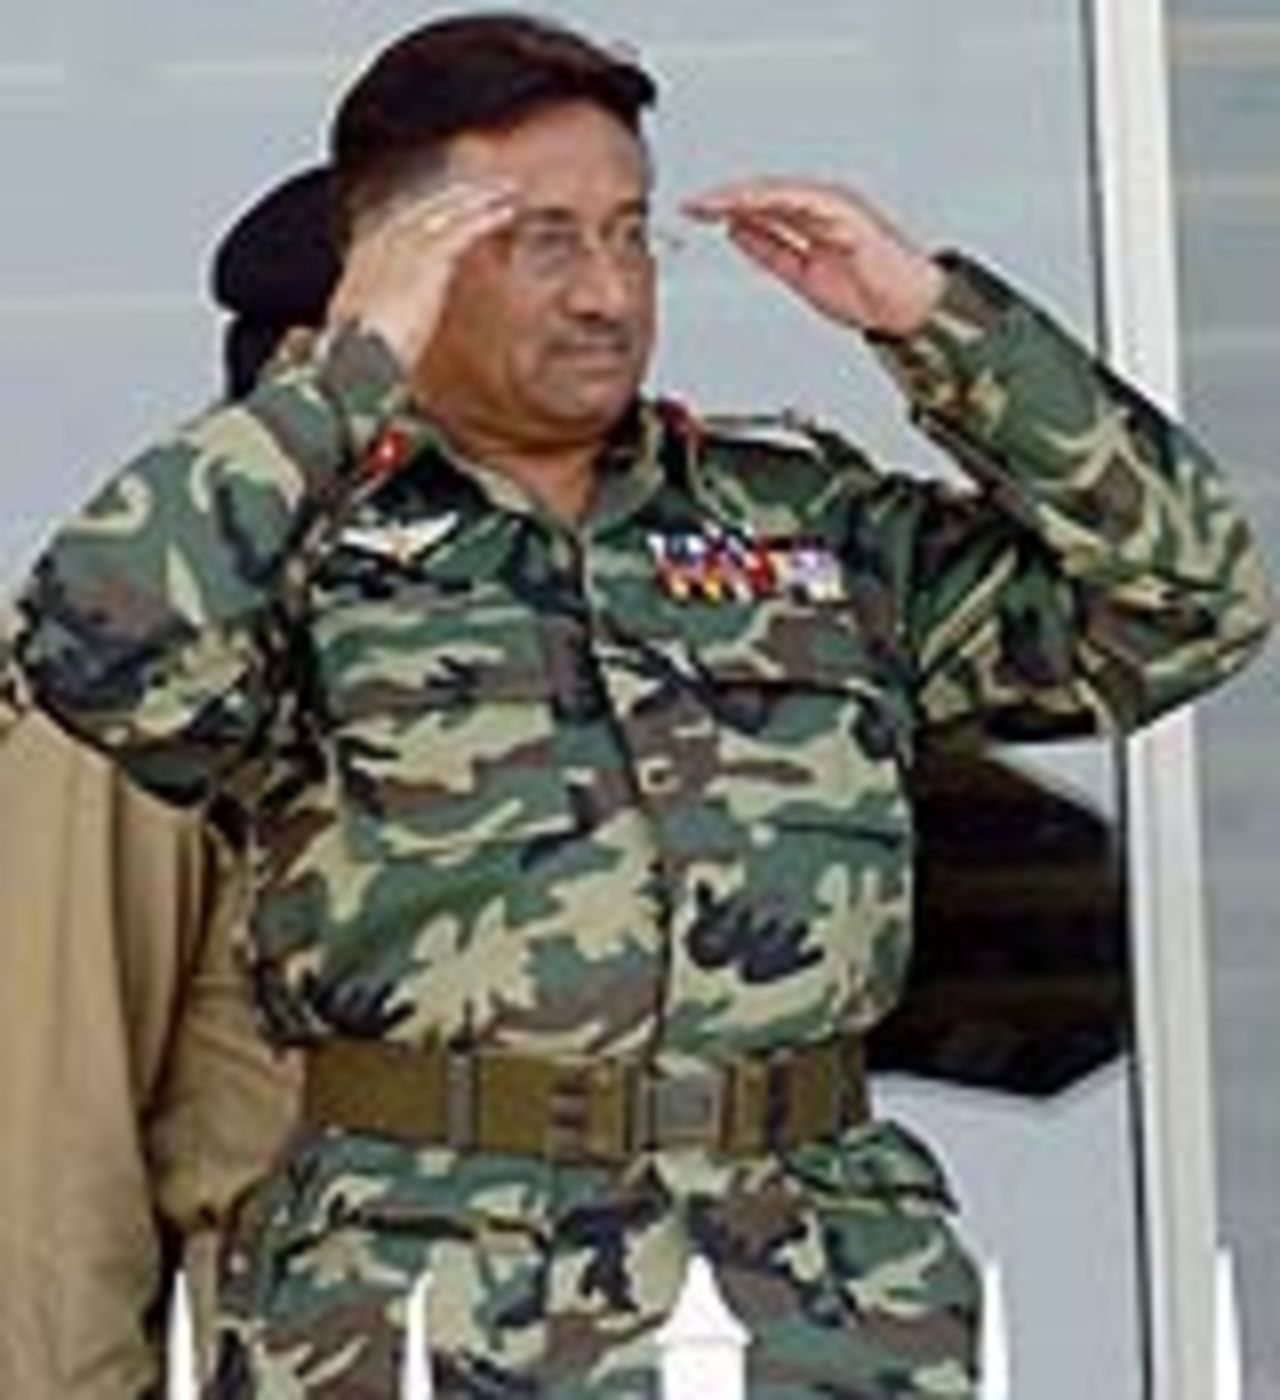 Pakistan's president, Pervez Musharraf, gestures to the crowd during the deciding ODI at Lahore, Pakistan v India, 5th ODI, Lahore, March 24, 2004